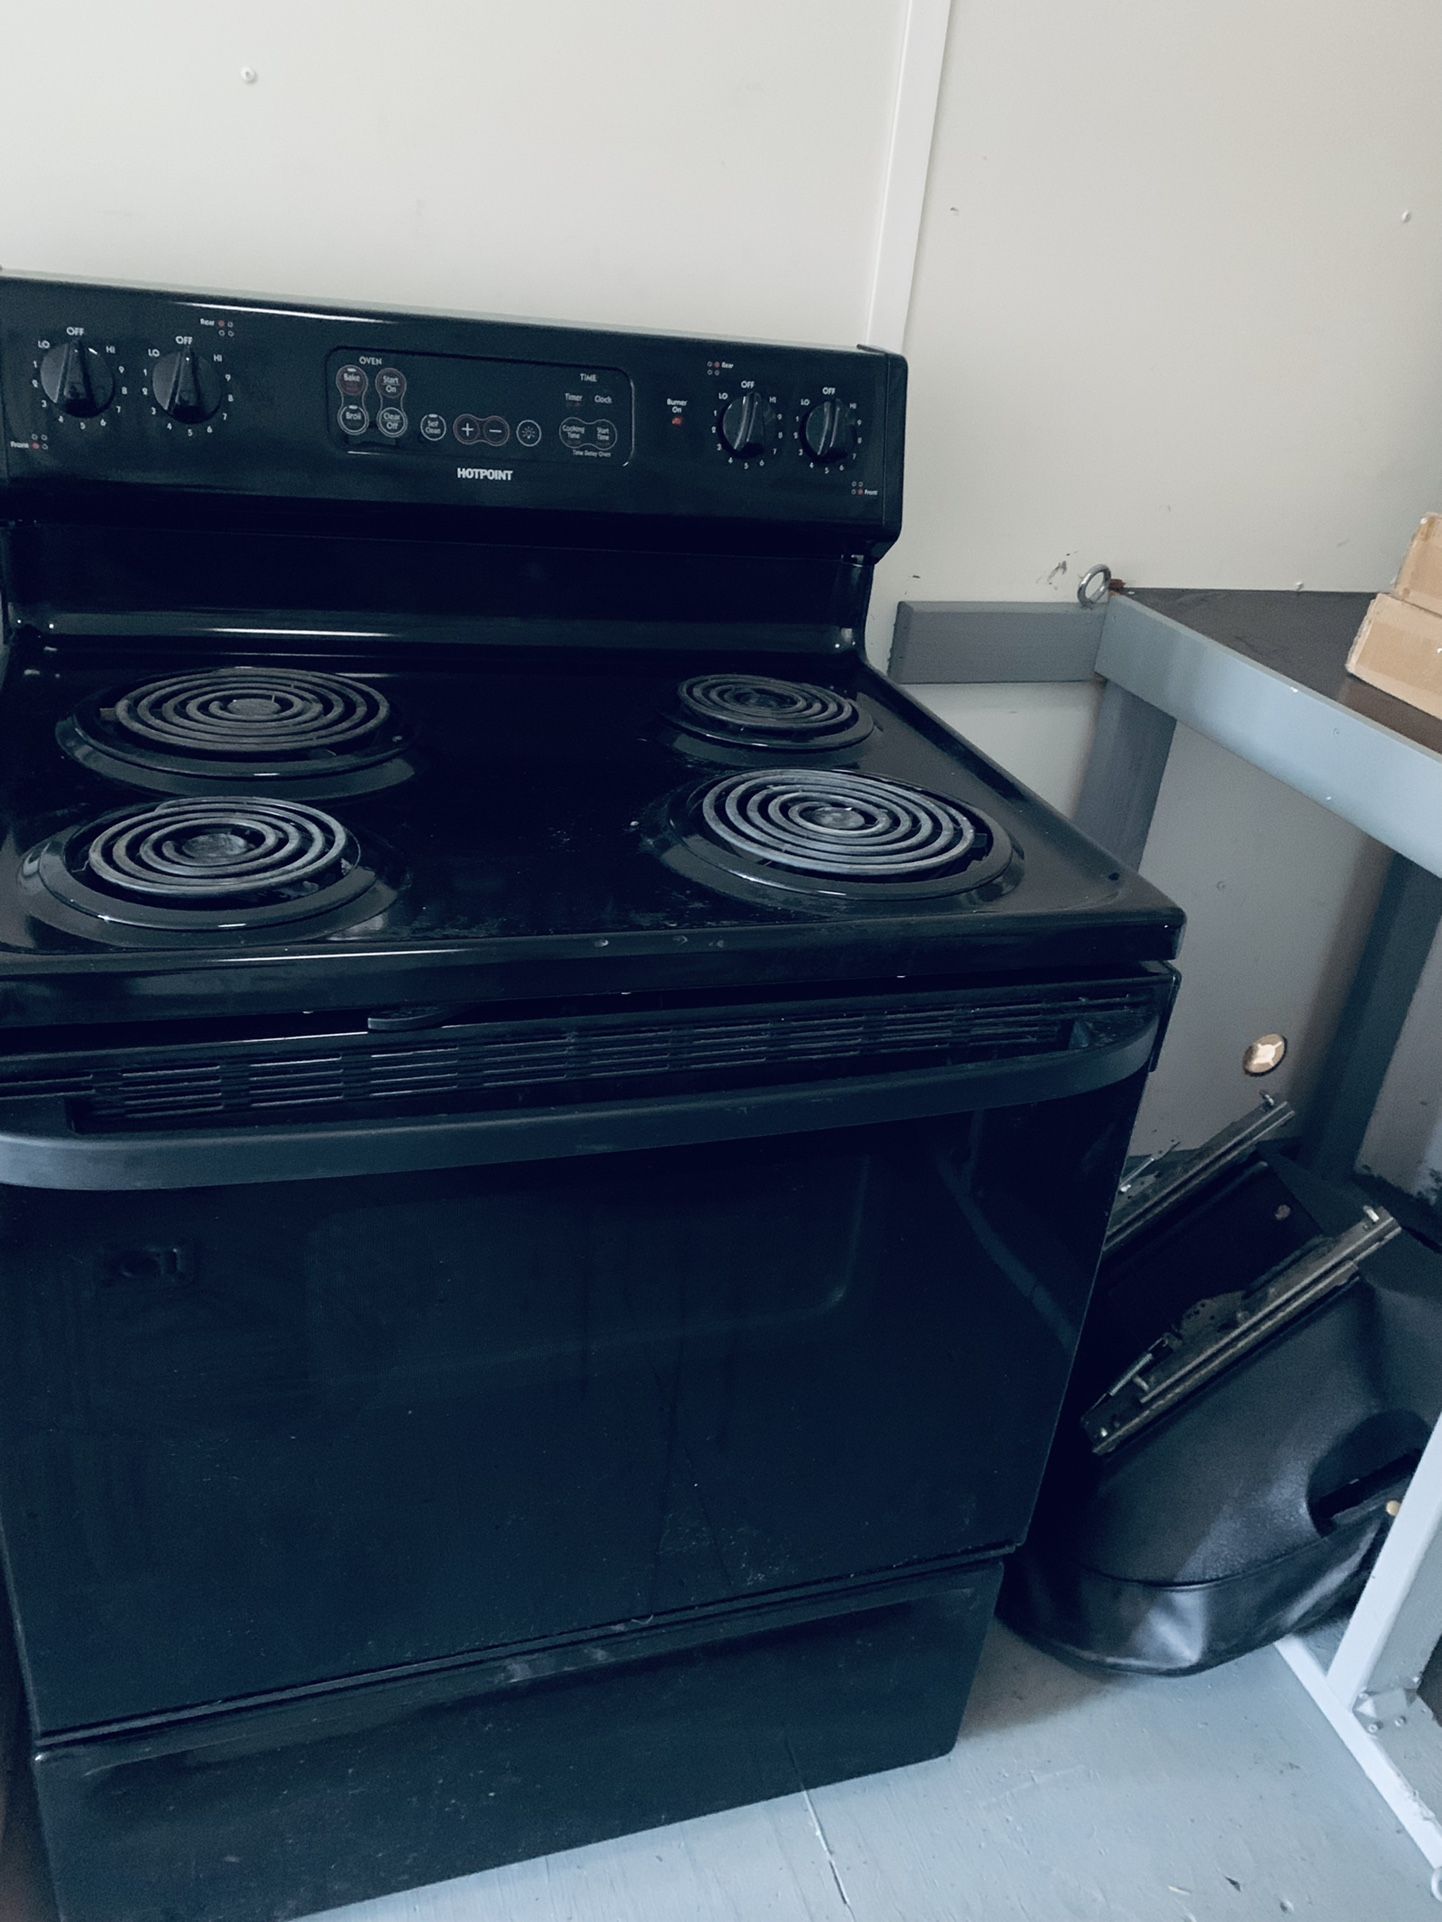 Cooktop hot point stove oven whirlpool refrigerator black set